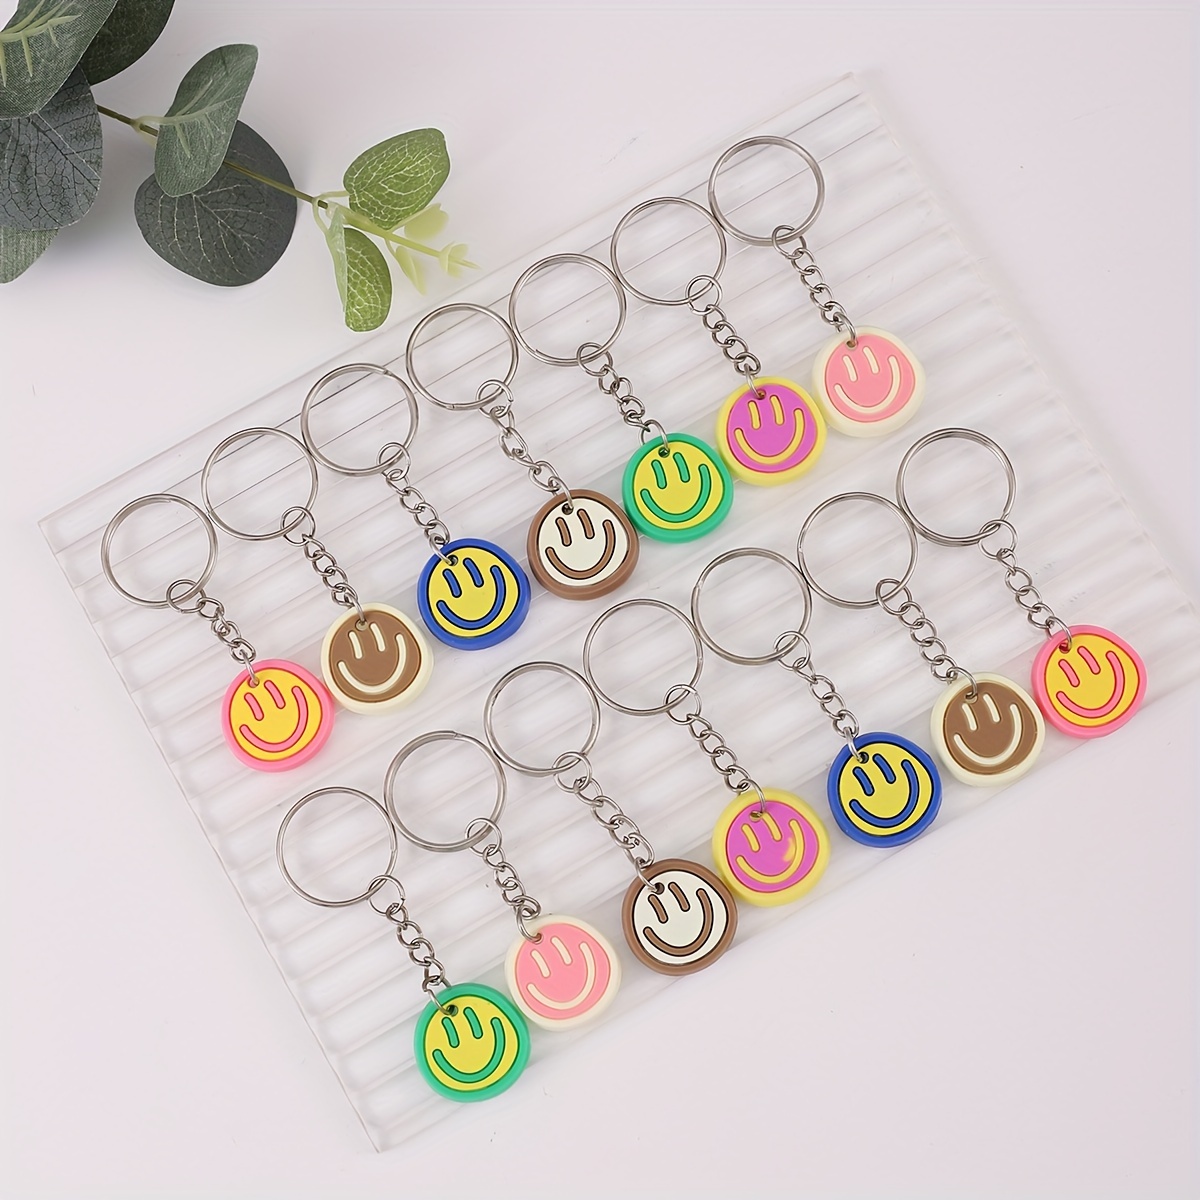 

14pcs Cute Cartoon Smile Face Keychain Colorful Pvc Key Chain Ring Bag Backpack Charm Car Key Pendant Birthday Party Favors Boys Daily Use Gift